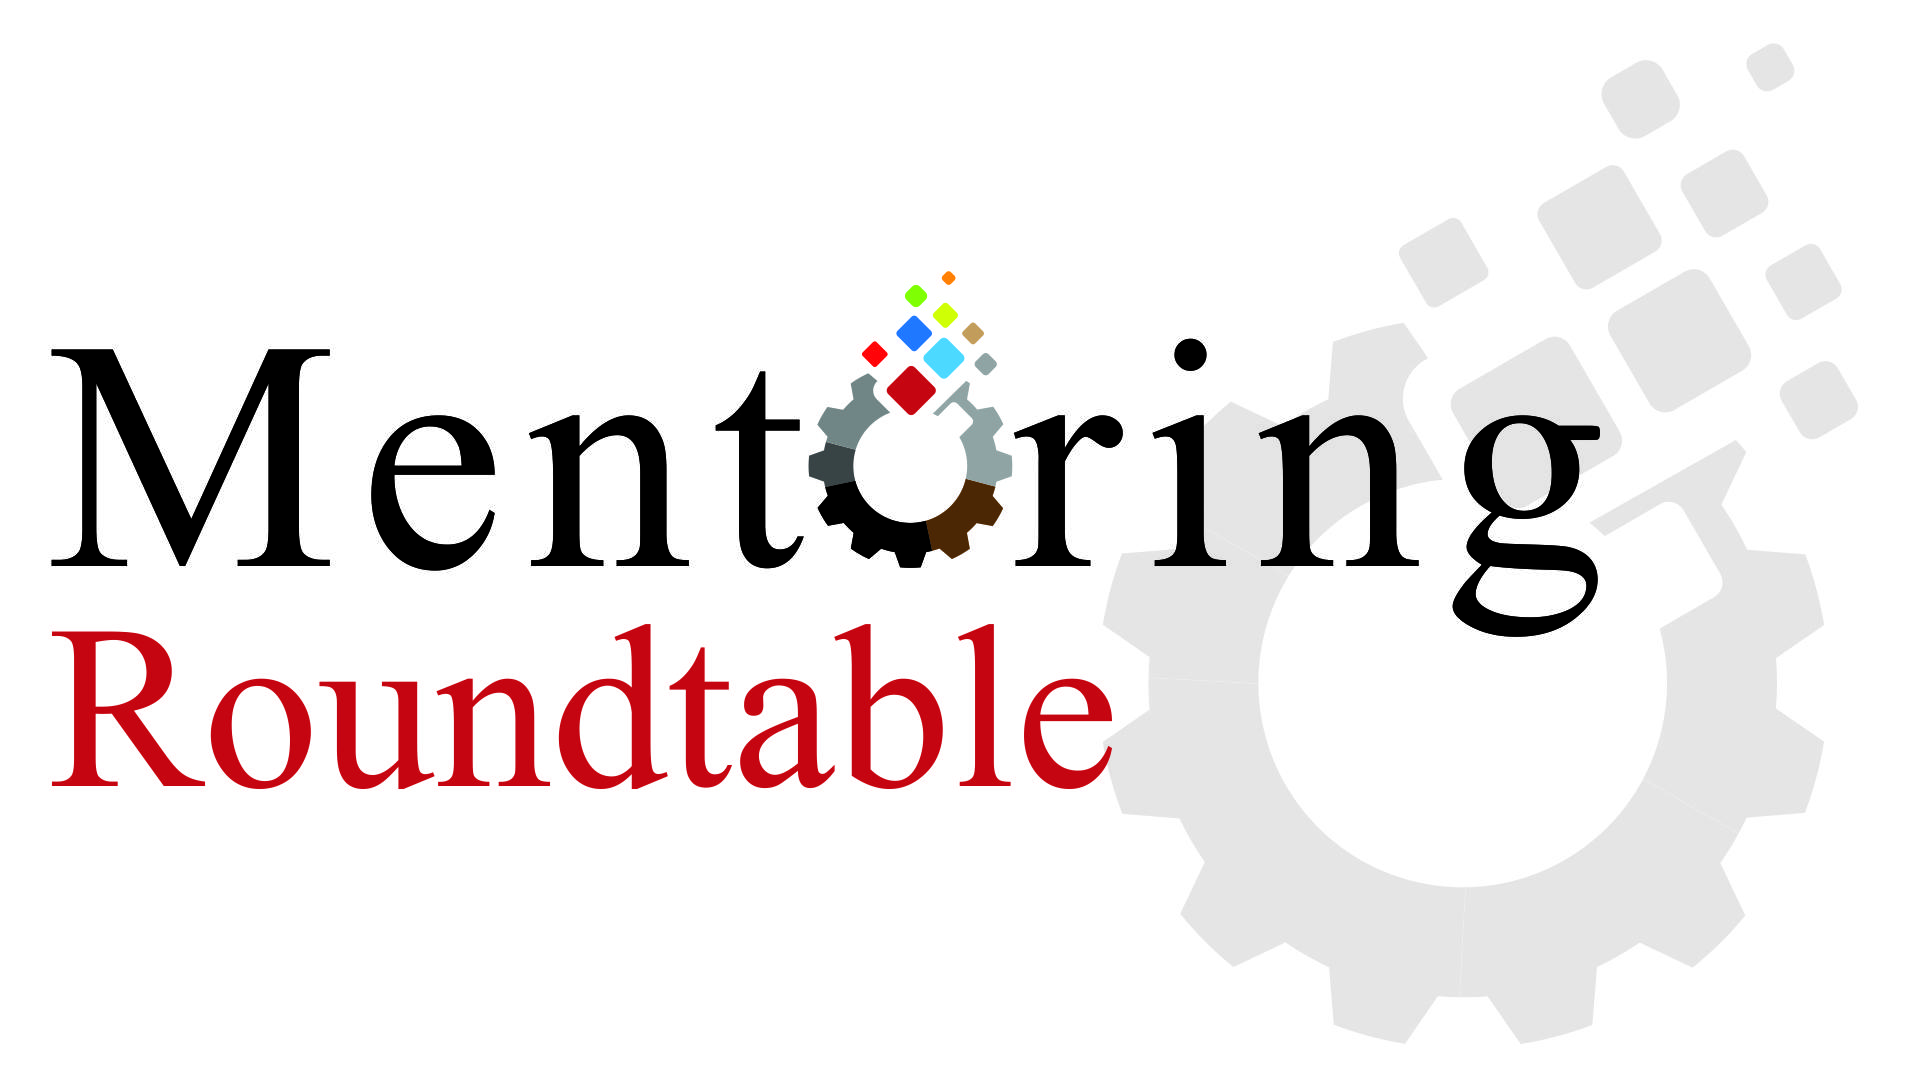 Mentoring Roundtable June 10th